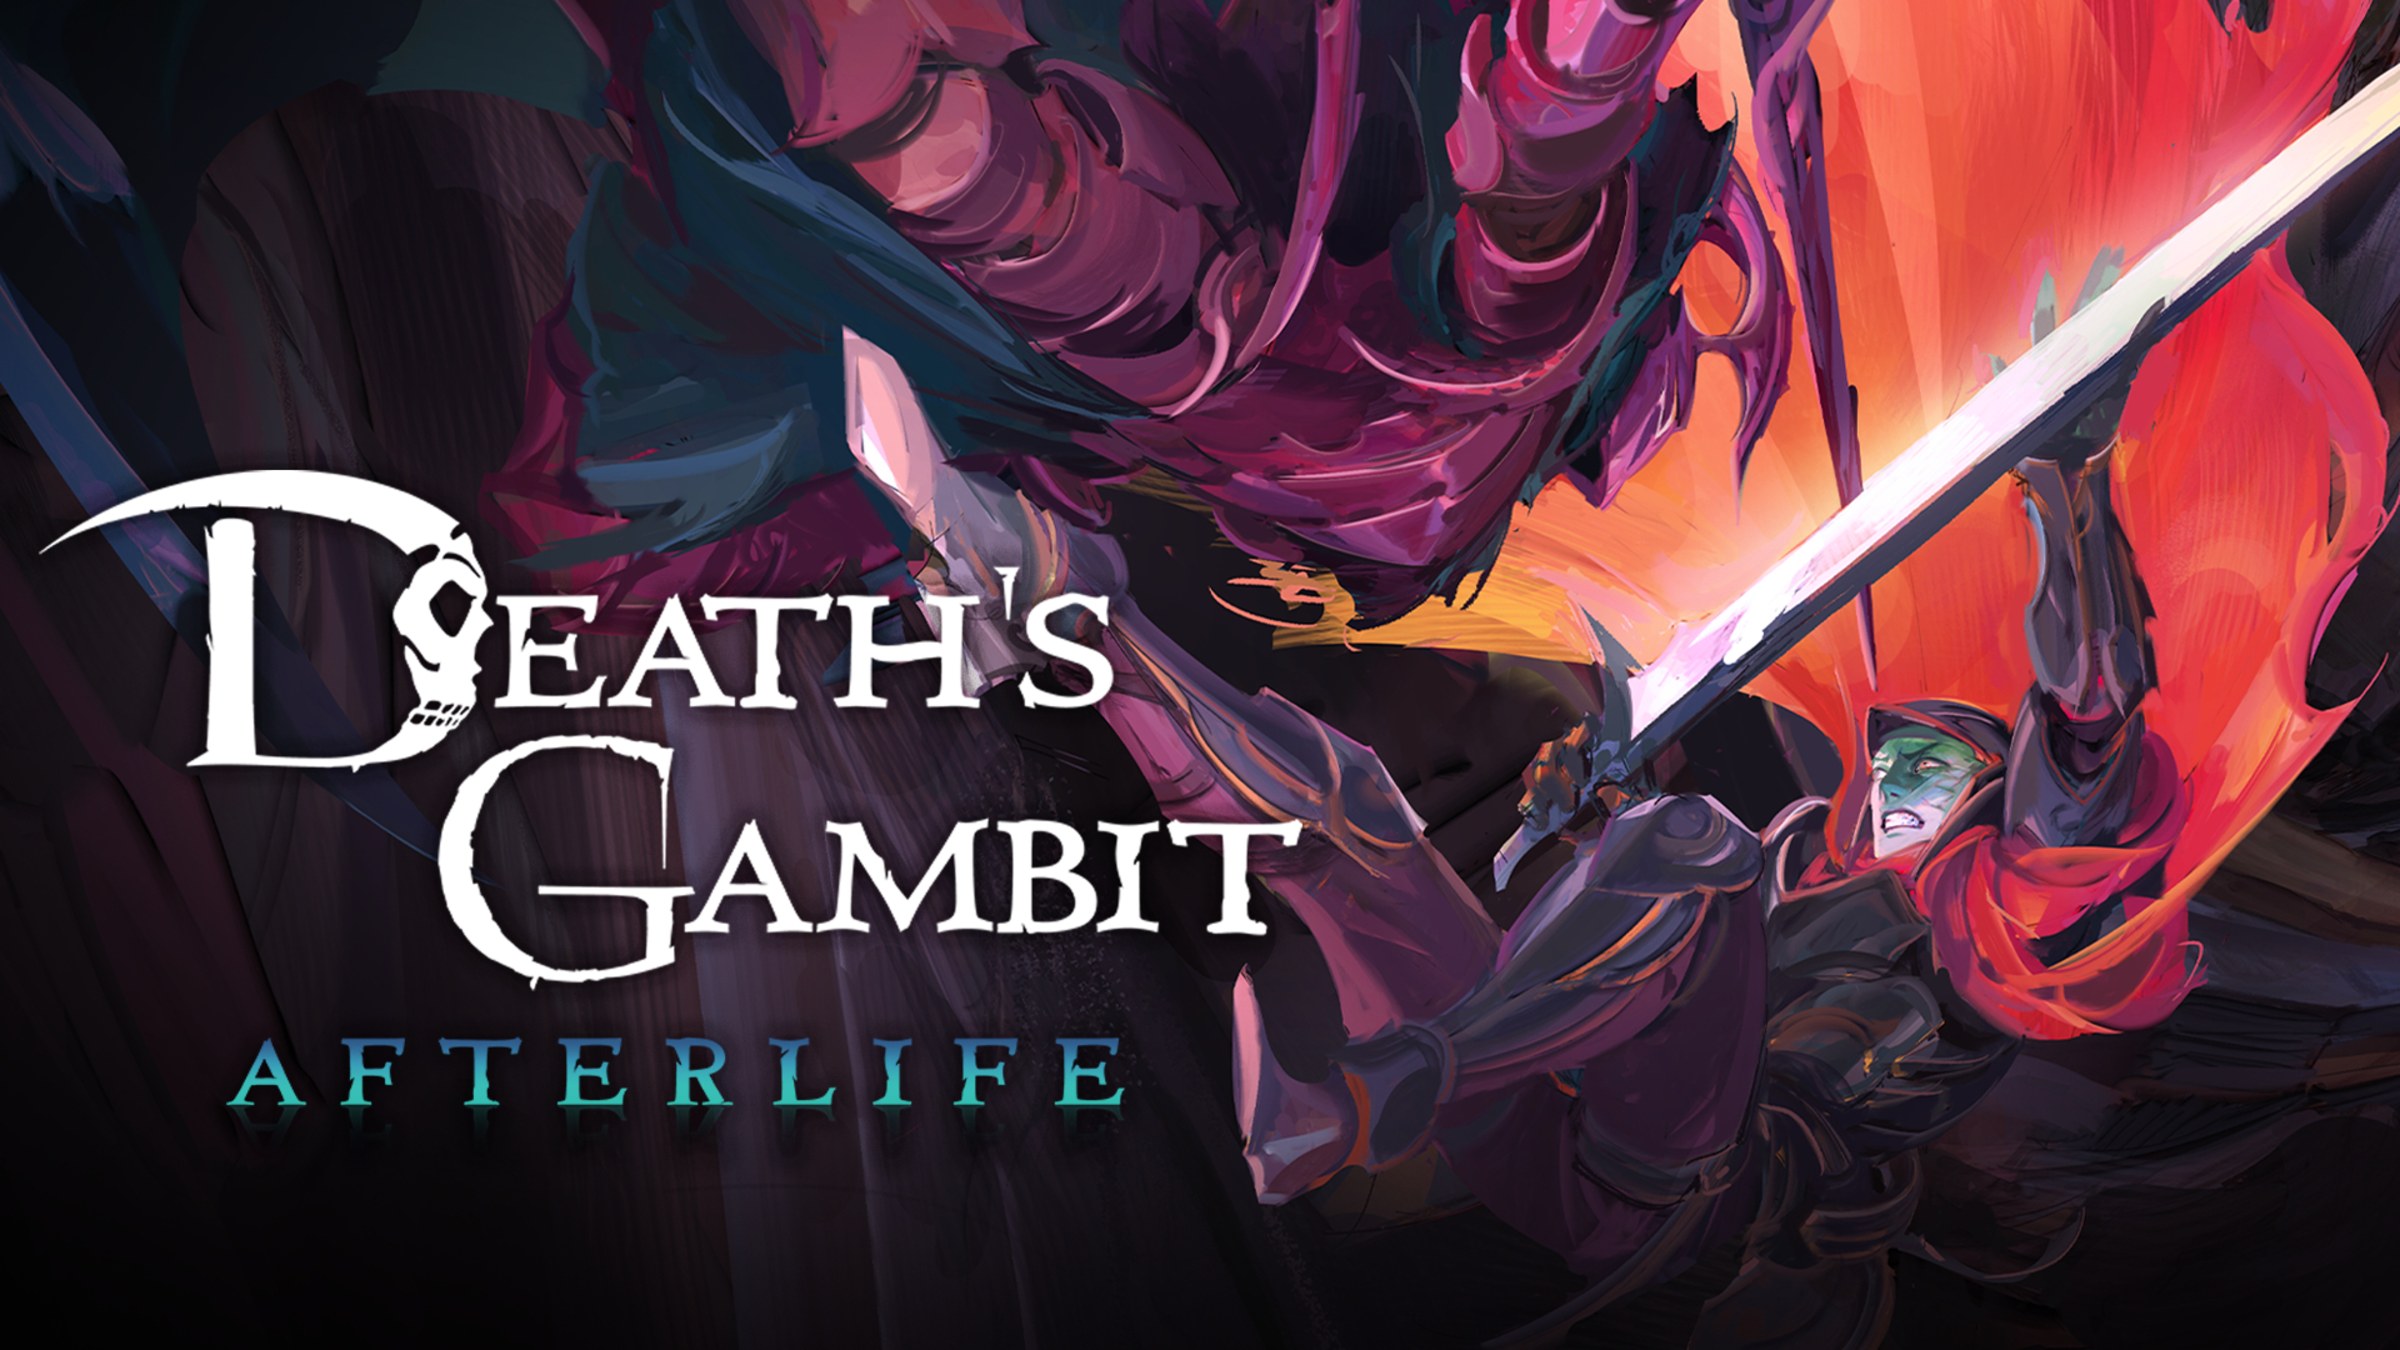 Death's Gambit: Afterlife - Ashes of Vados on